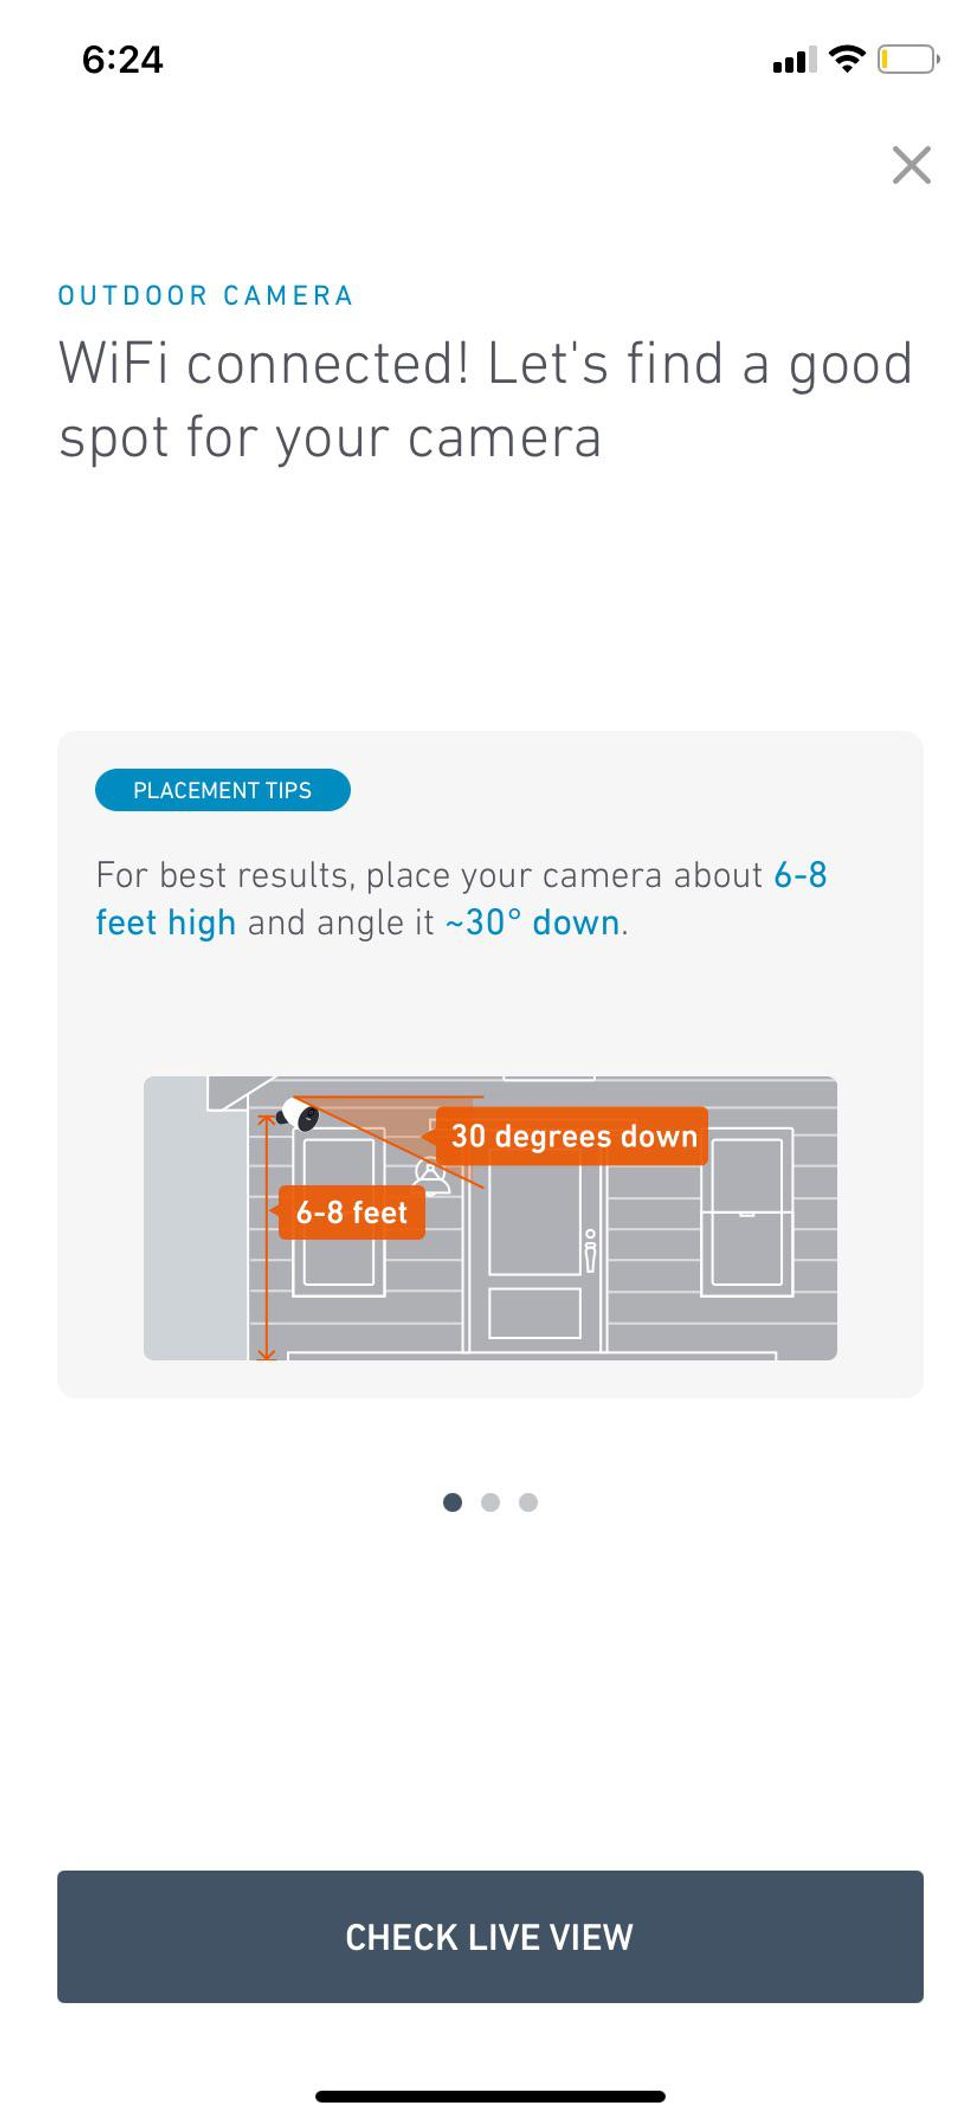 SimpliSafe app showing where to install outdoor security camera